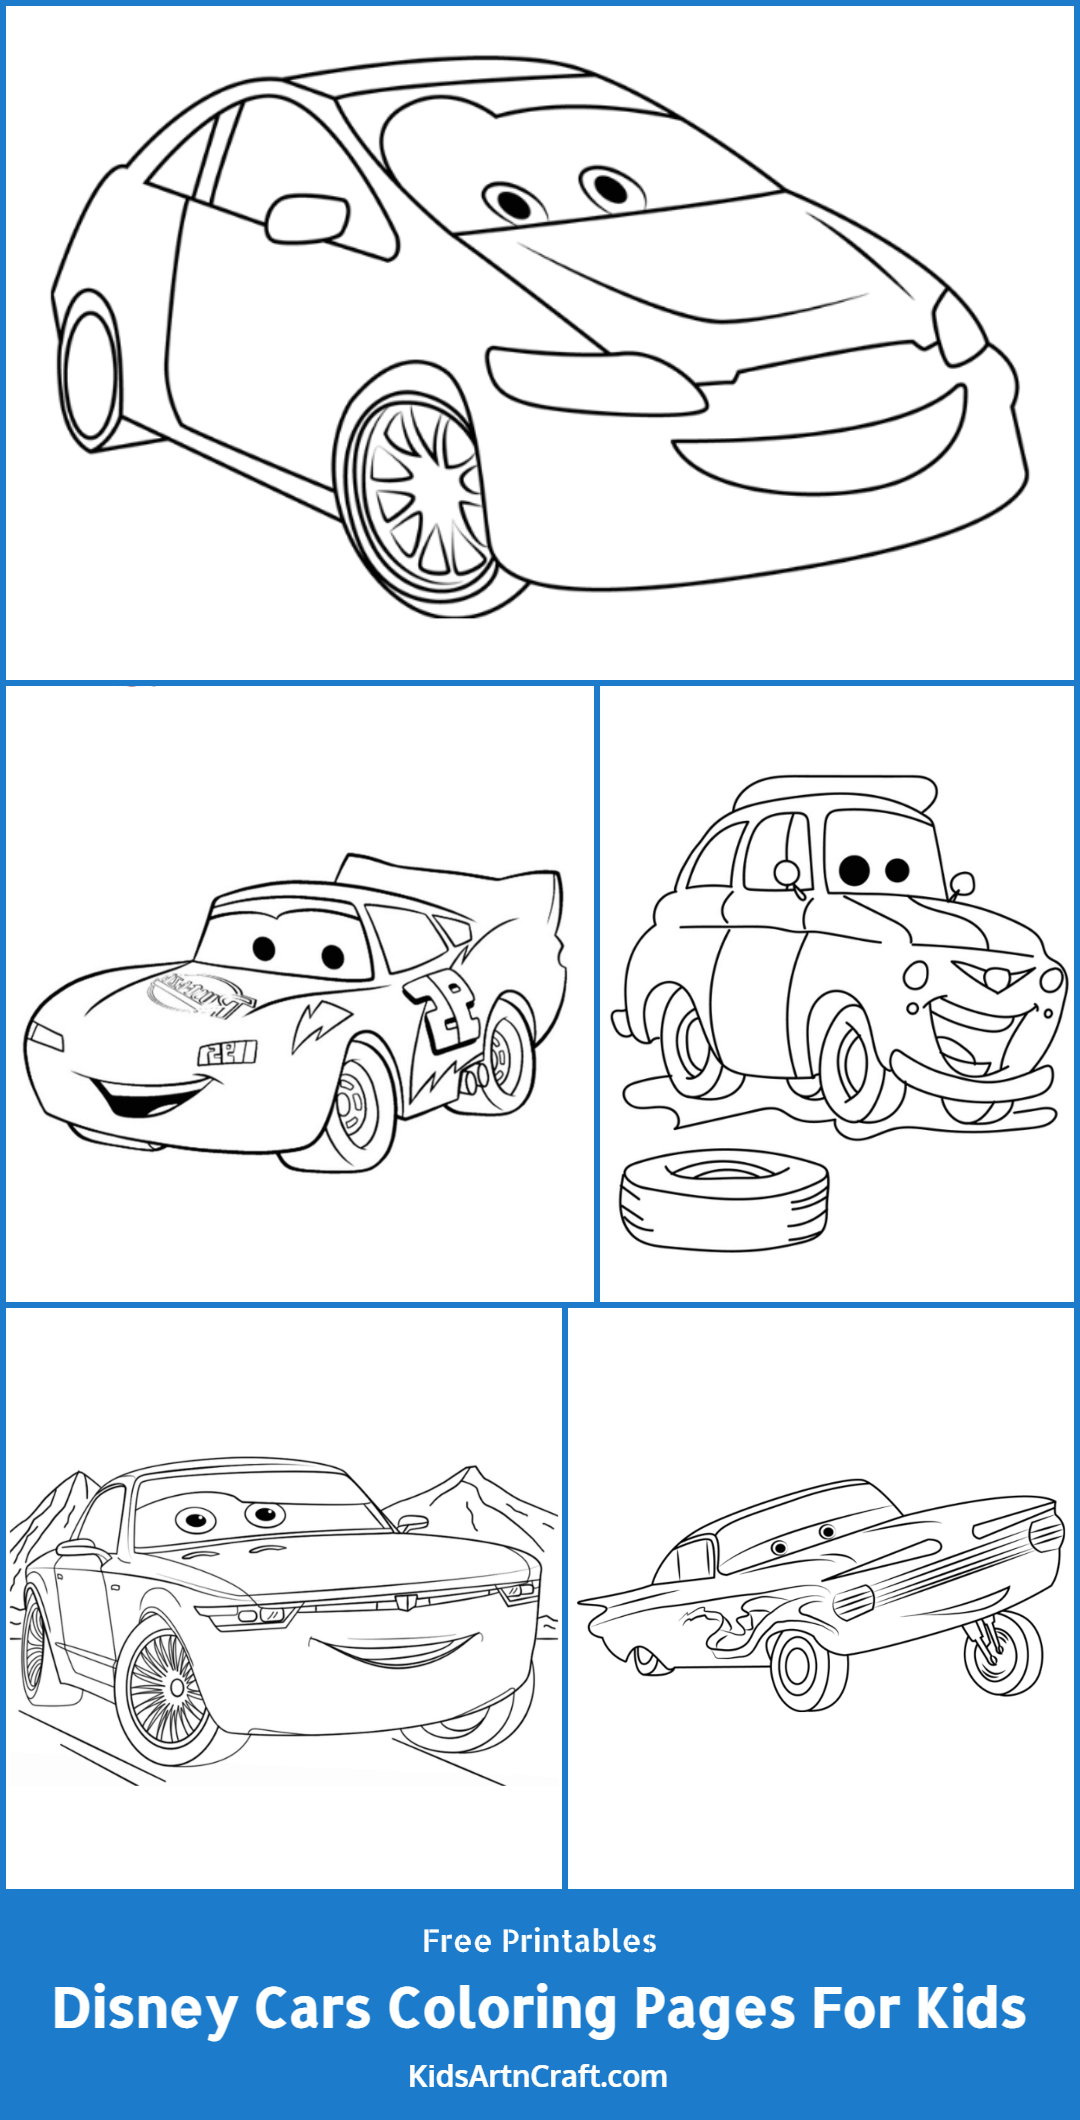 Disney Cars Coloring Pages For Kids – Free Printables